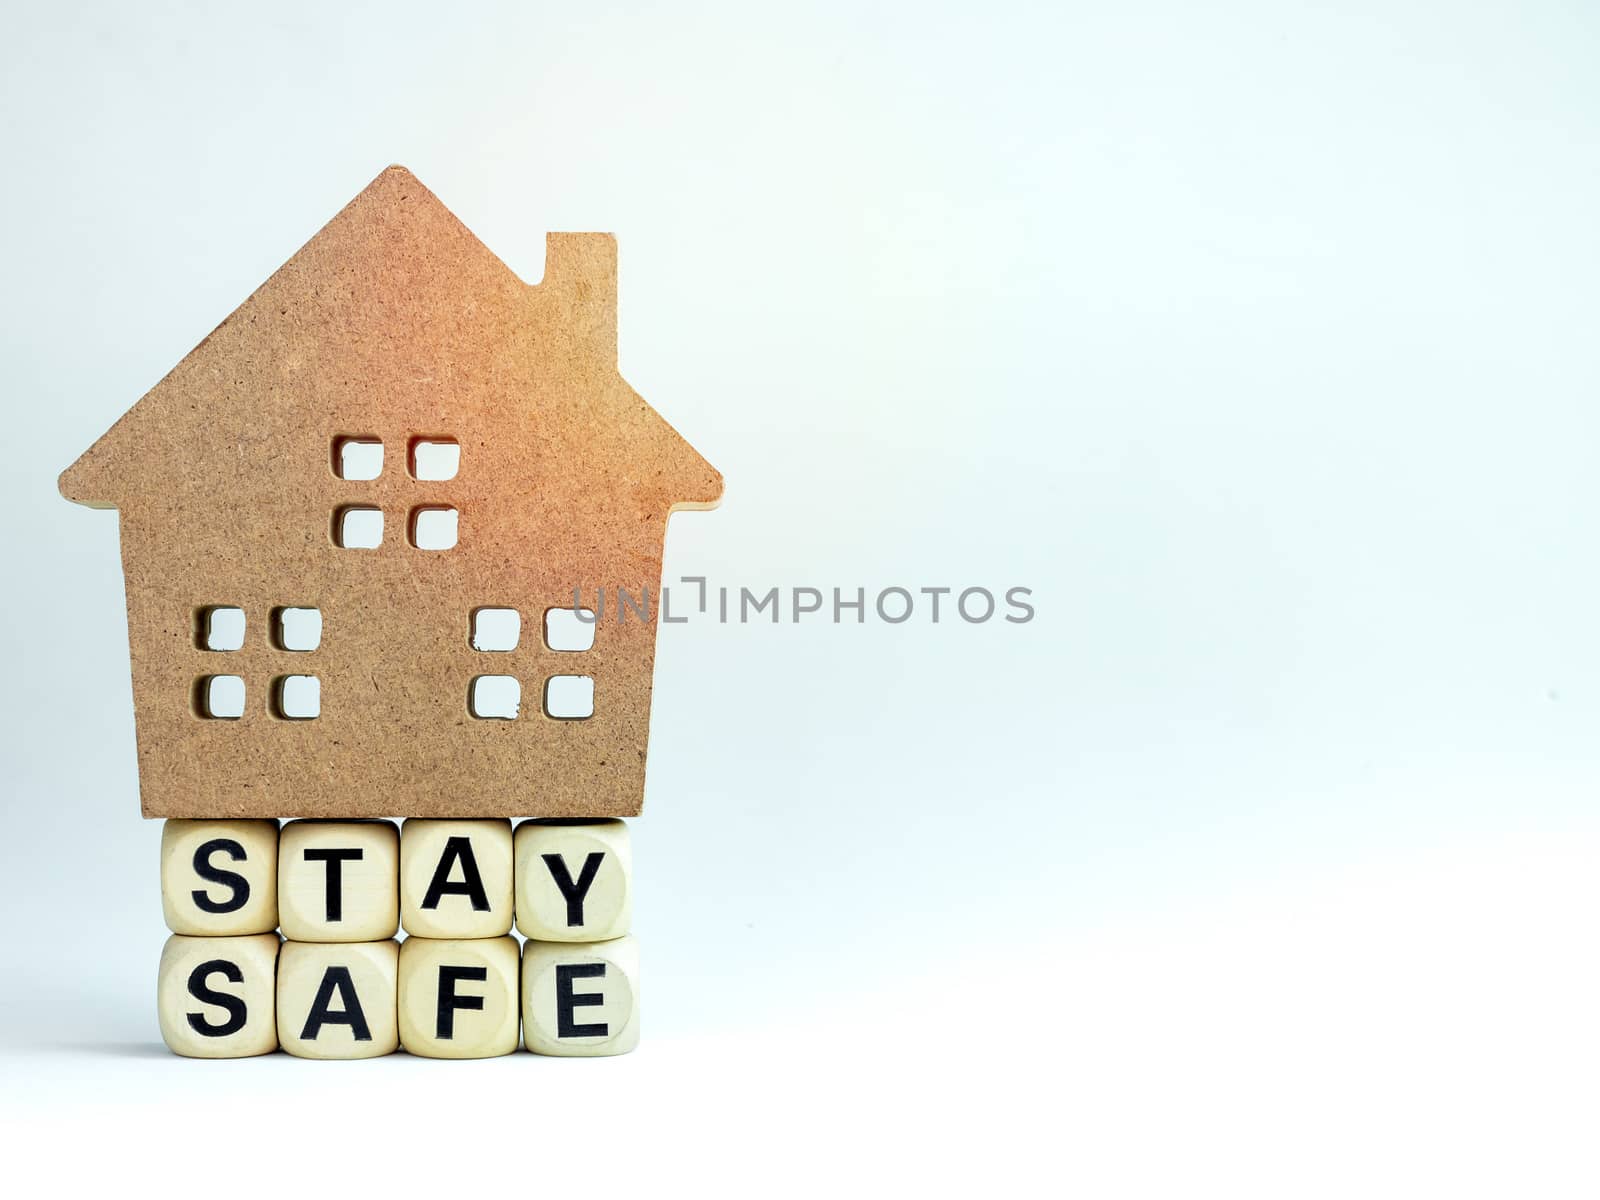 Stay safe concept. Word "Stay Safe" with wooden house isolated on white background with copy space, stay at home, social media campaign for covid-19 or coronavirus pandemic prevention.